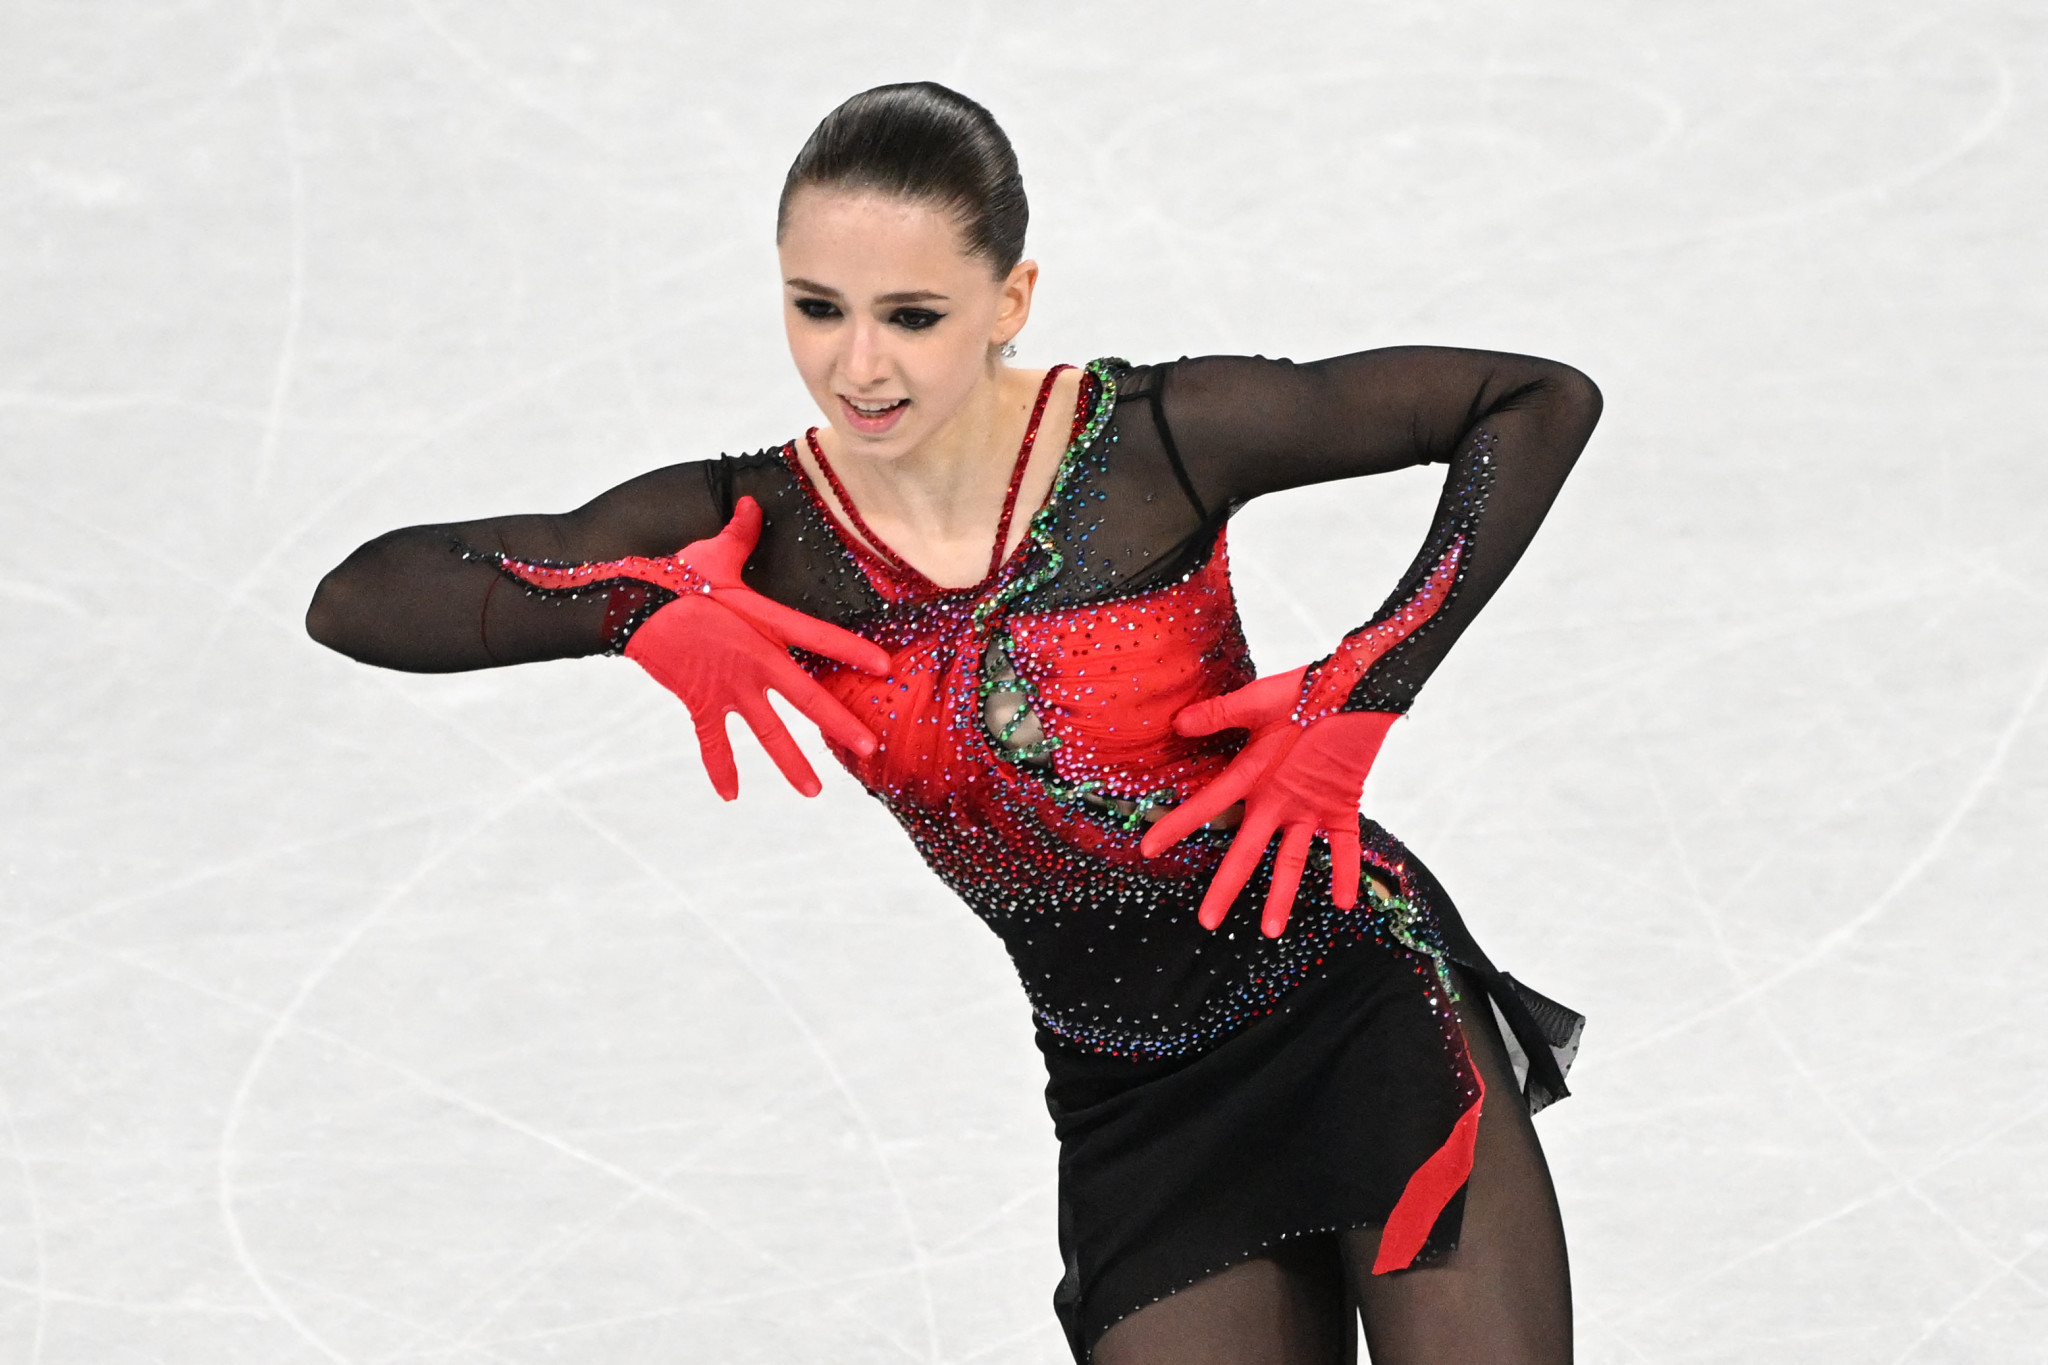 Kamila Valieva's failed drugs test prior to the Beijing 2022 overshadowed the figure skating competition at the Winter Olympic Games ©Getty Images